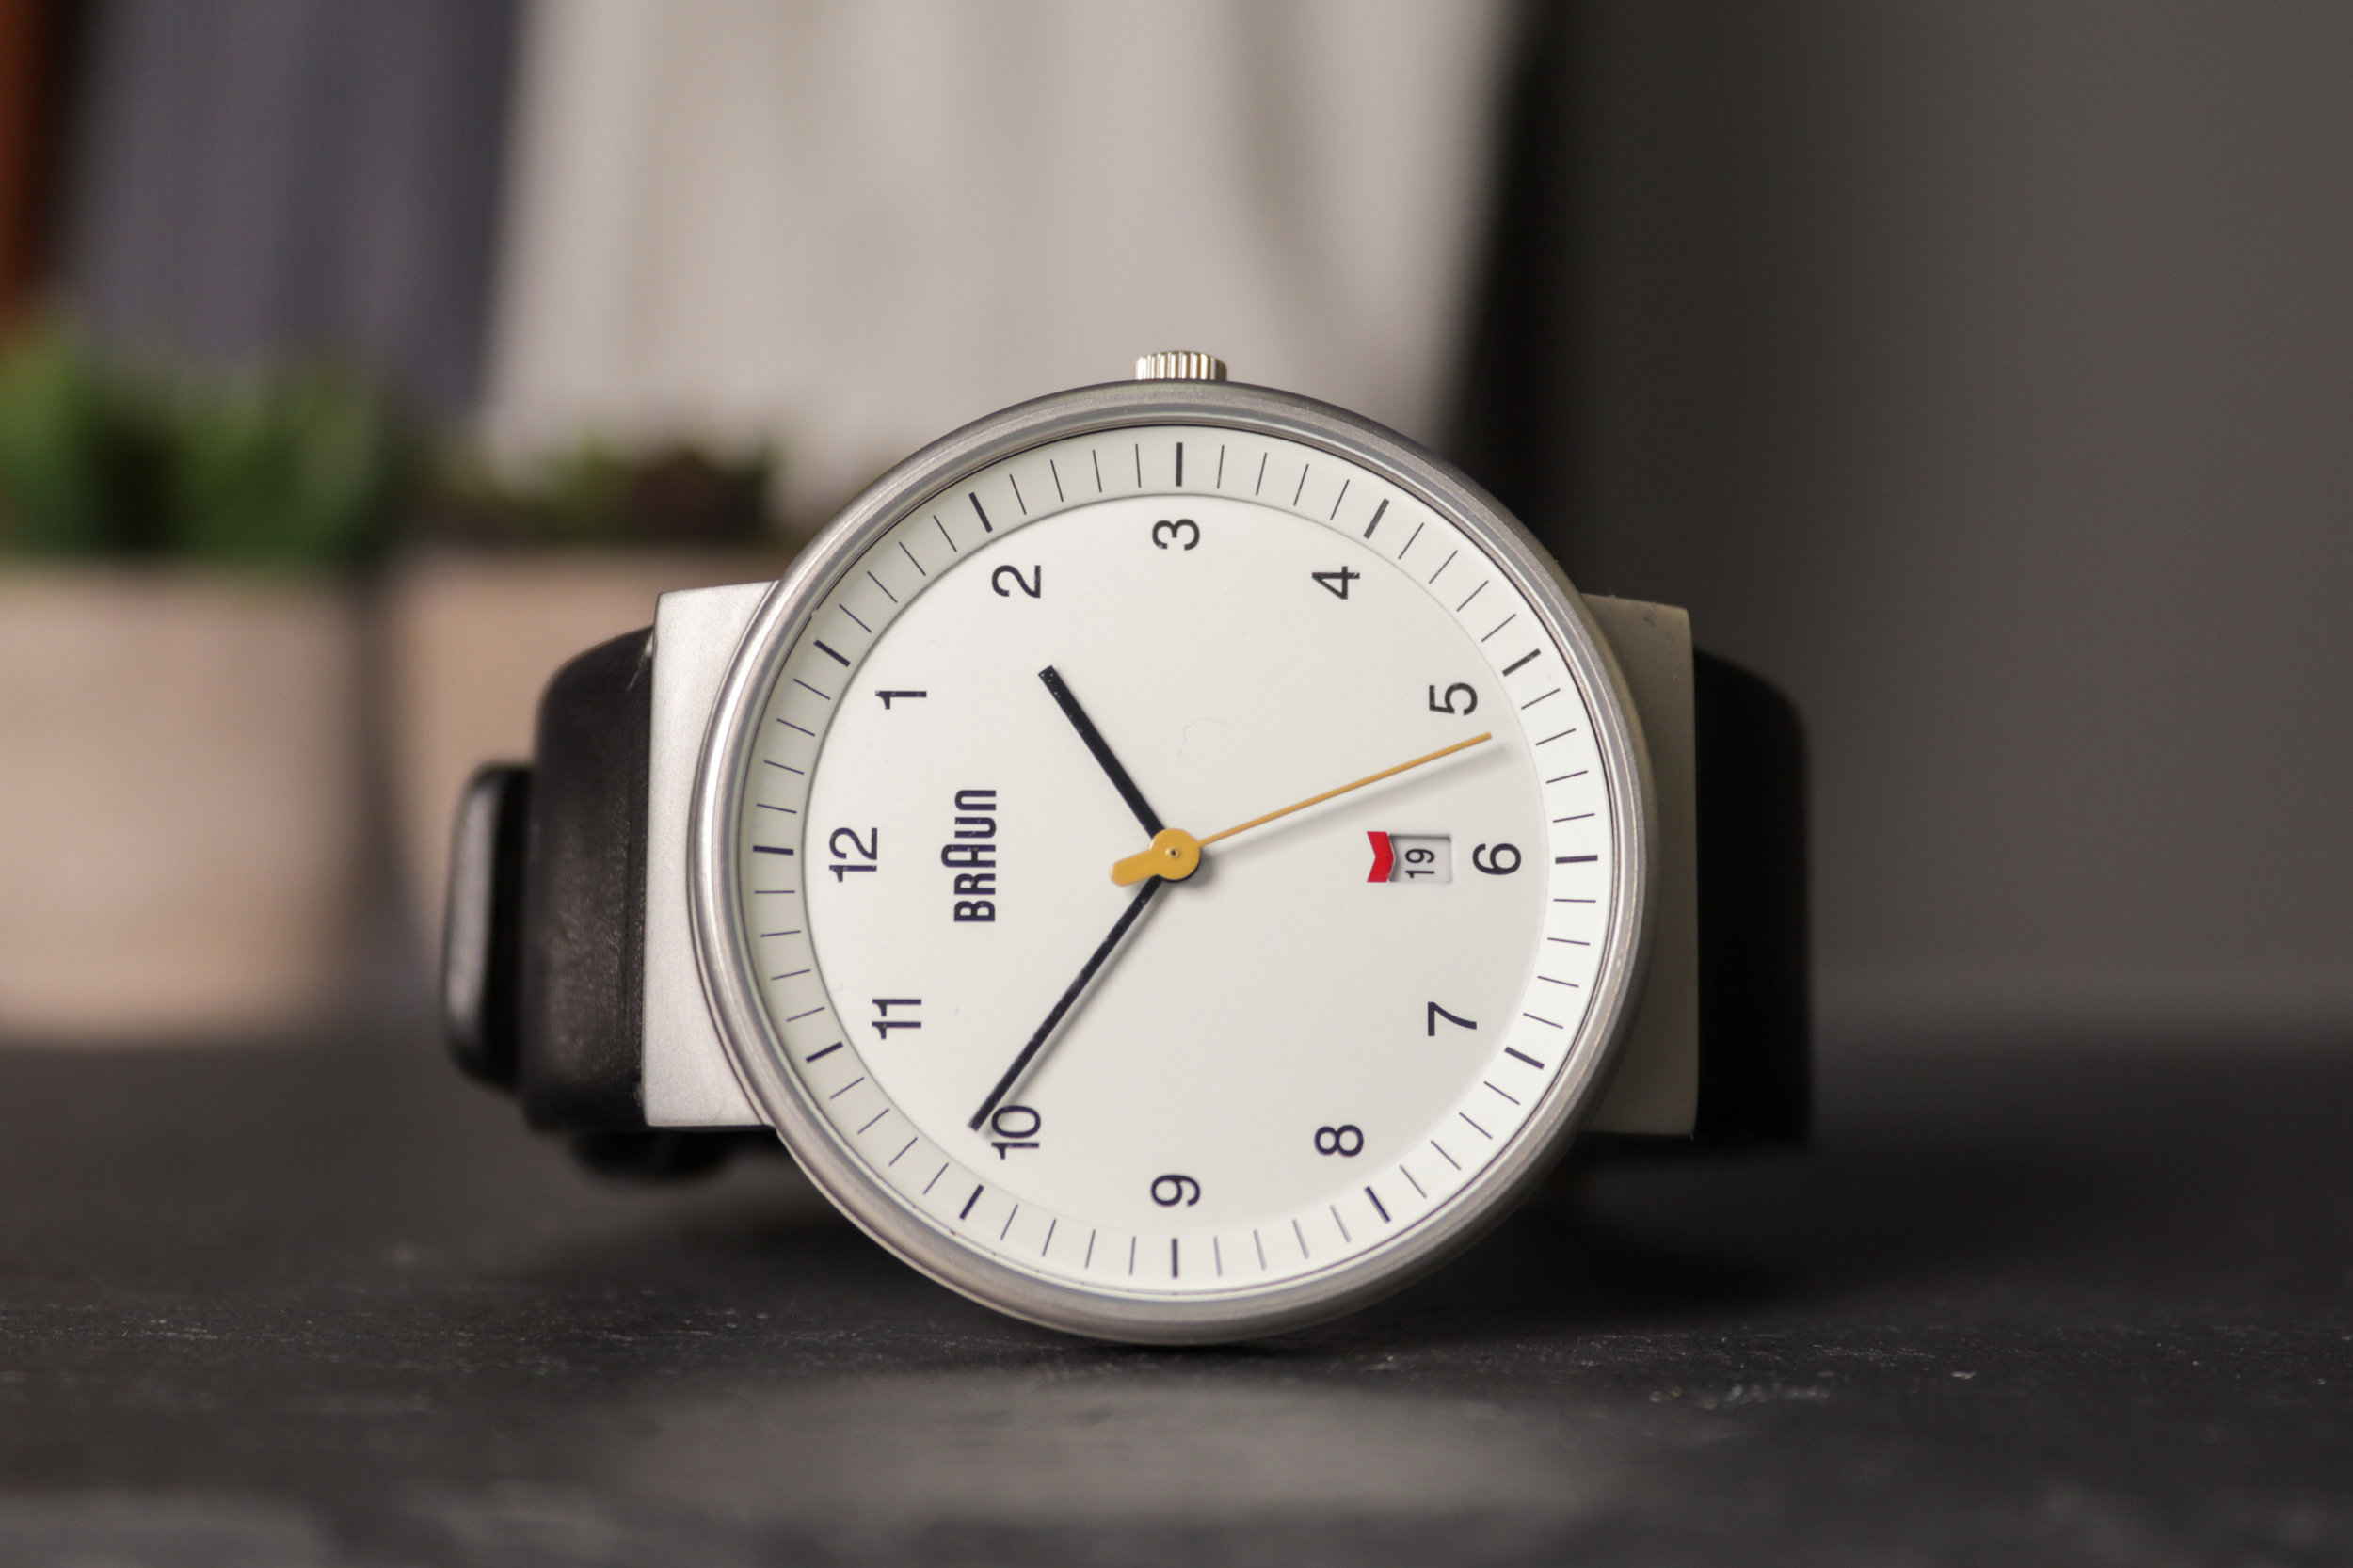 Better Alternatives To Daniel Wellington Watches Ben's Watch - Exploring Affordable